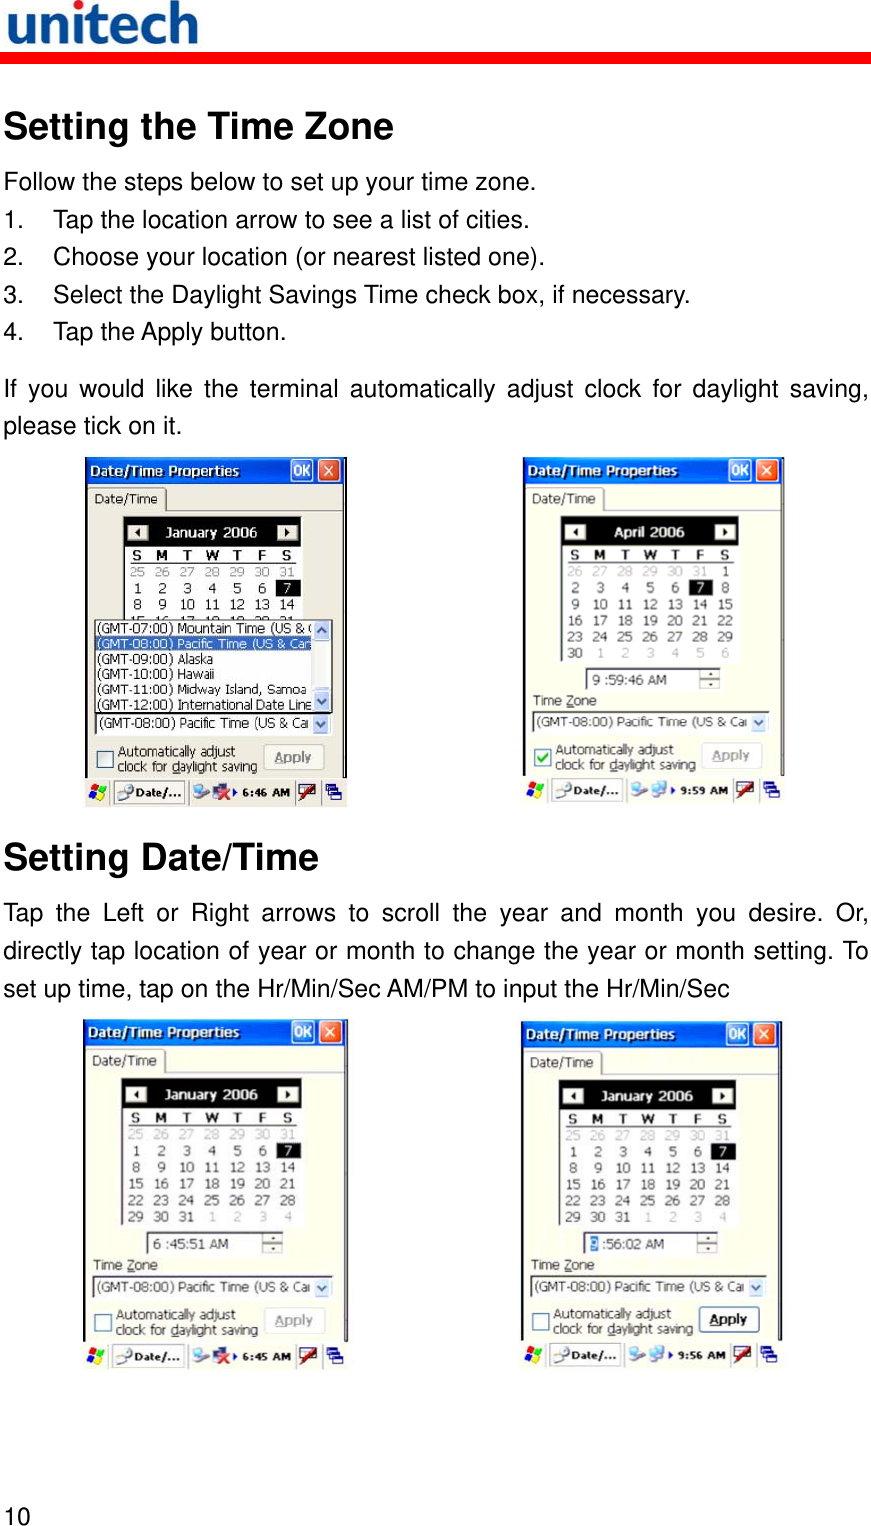   10  Setting the Time Zone Follow the steps below to set up your time zone. 1.  Tap the location arrow to see a list of cities. 2.  Choose your location (or nearest listed one). 3.  Select the Daylight Savings Time check box, if necessary. 4.  Tap the Apply button. If you would like the terminal automatically adjust clock for daylight saving, please tick on it.   Setting Date/Time Tap the Left or Right arrows to scroll the year and month you desire. Or, directly tap location of year or month to change the year or month setting. To set up time, tap on the Hr/Min/Sec AM/PM to input the Hr/Min/Sec   